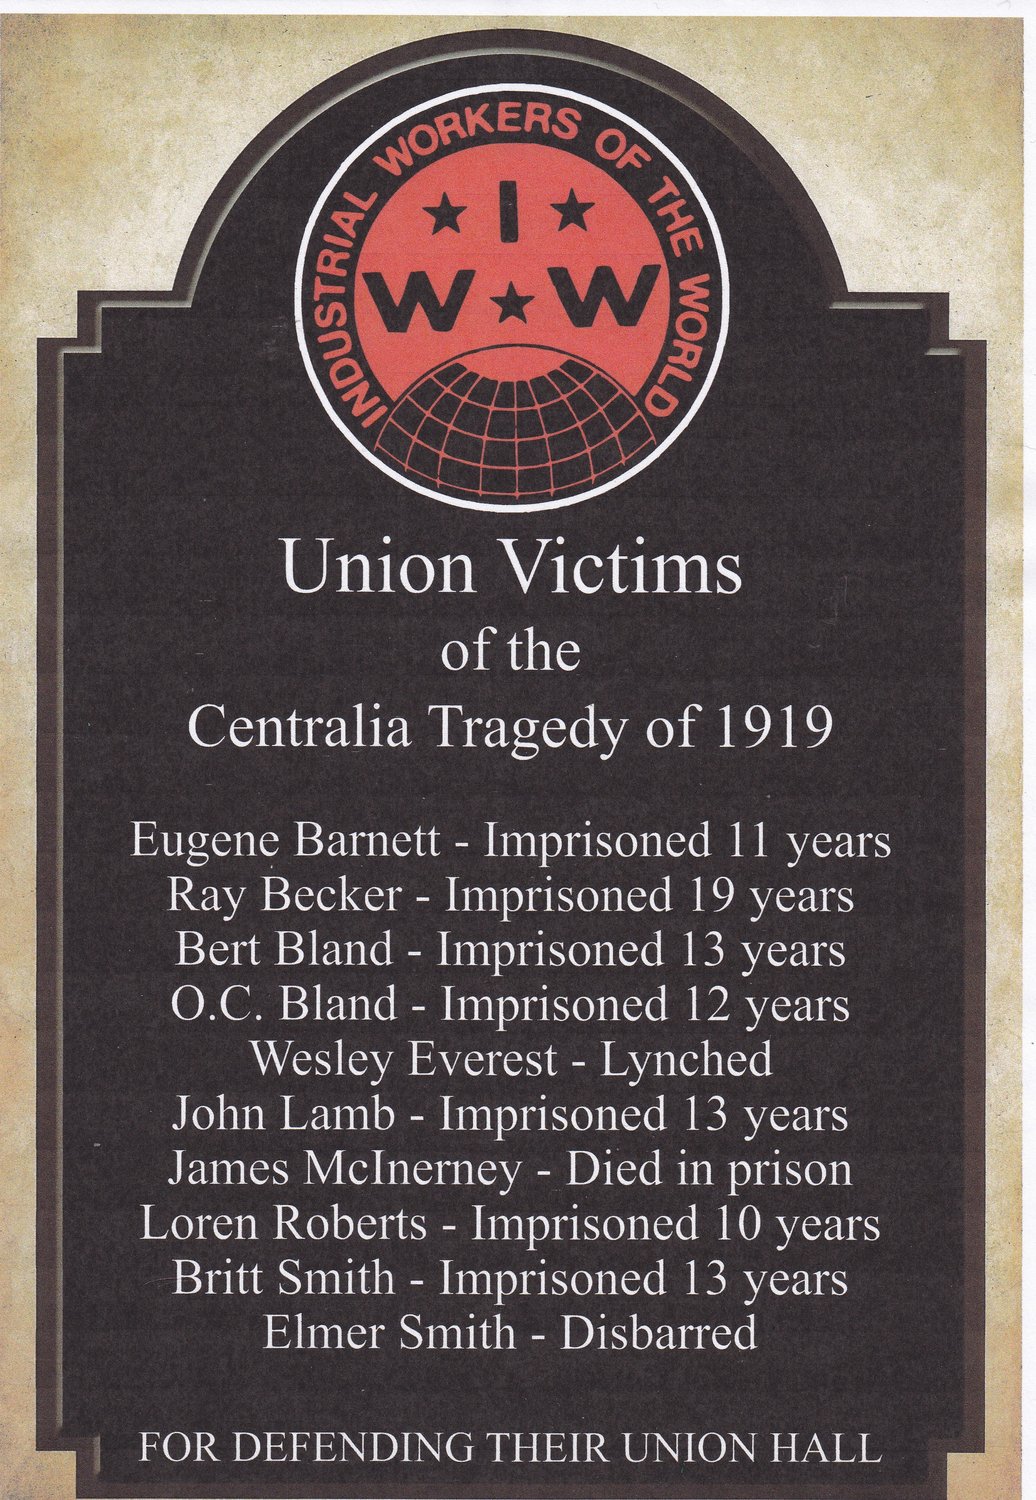 Mike Garrison, an IWW member, proposed a bronze plaque bearing the IWW logo at the top followed by the words: “Union Victims of the Centralia Tragedy of 1919.”